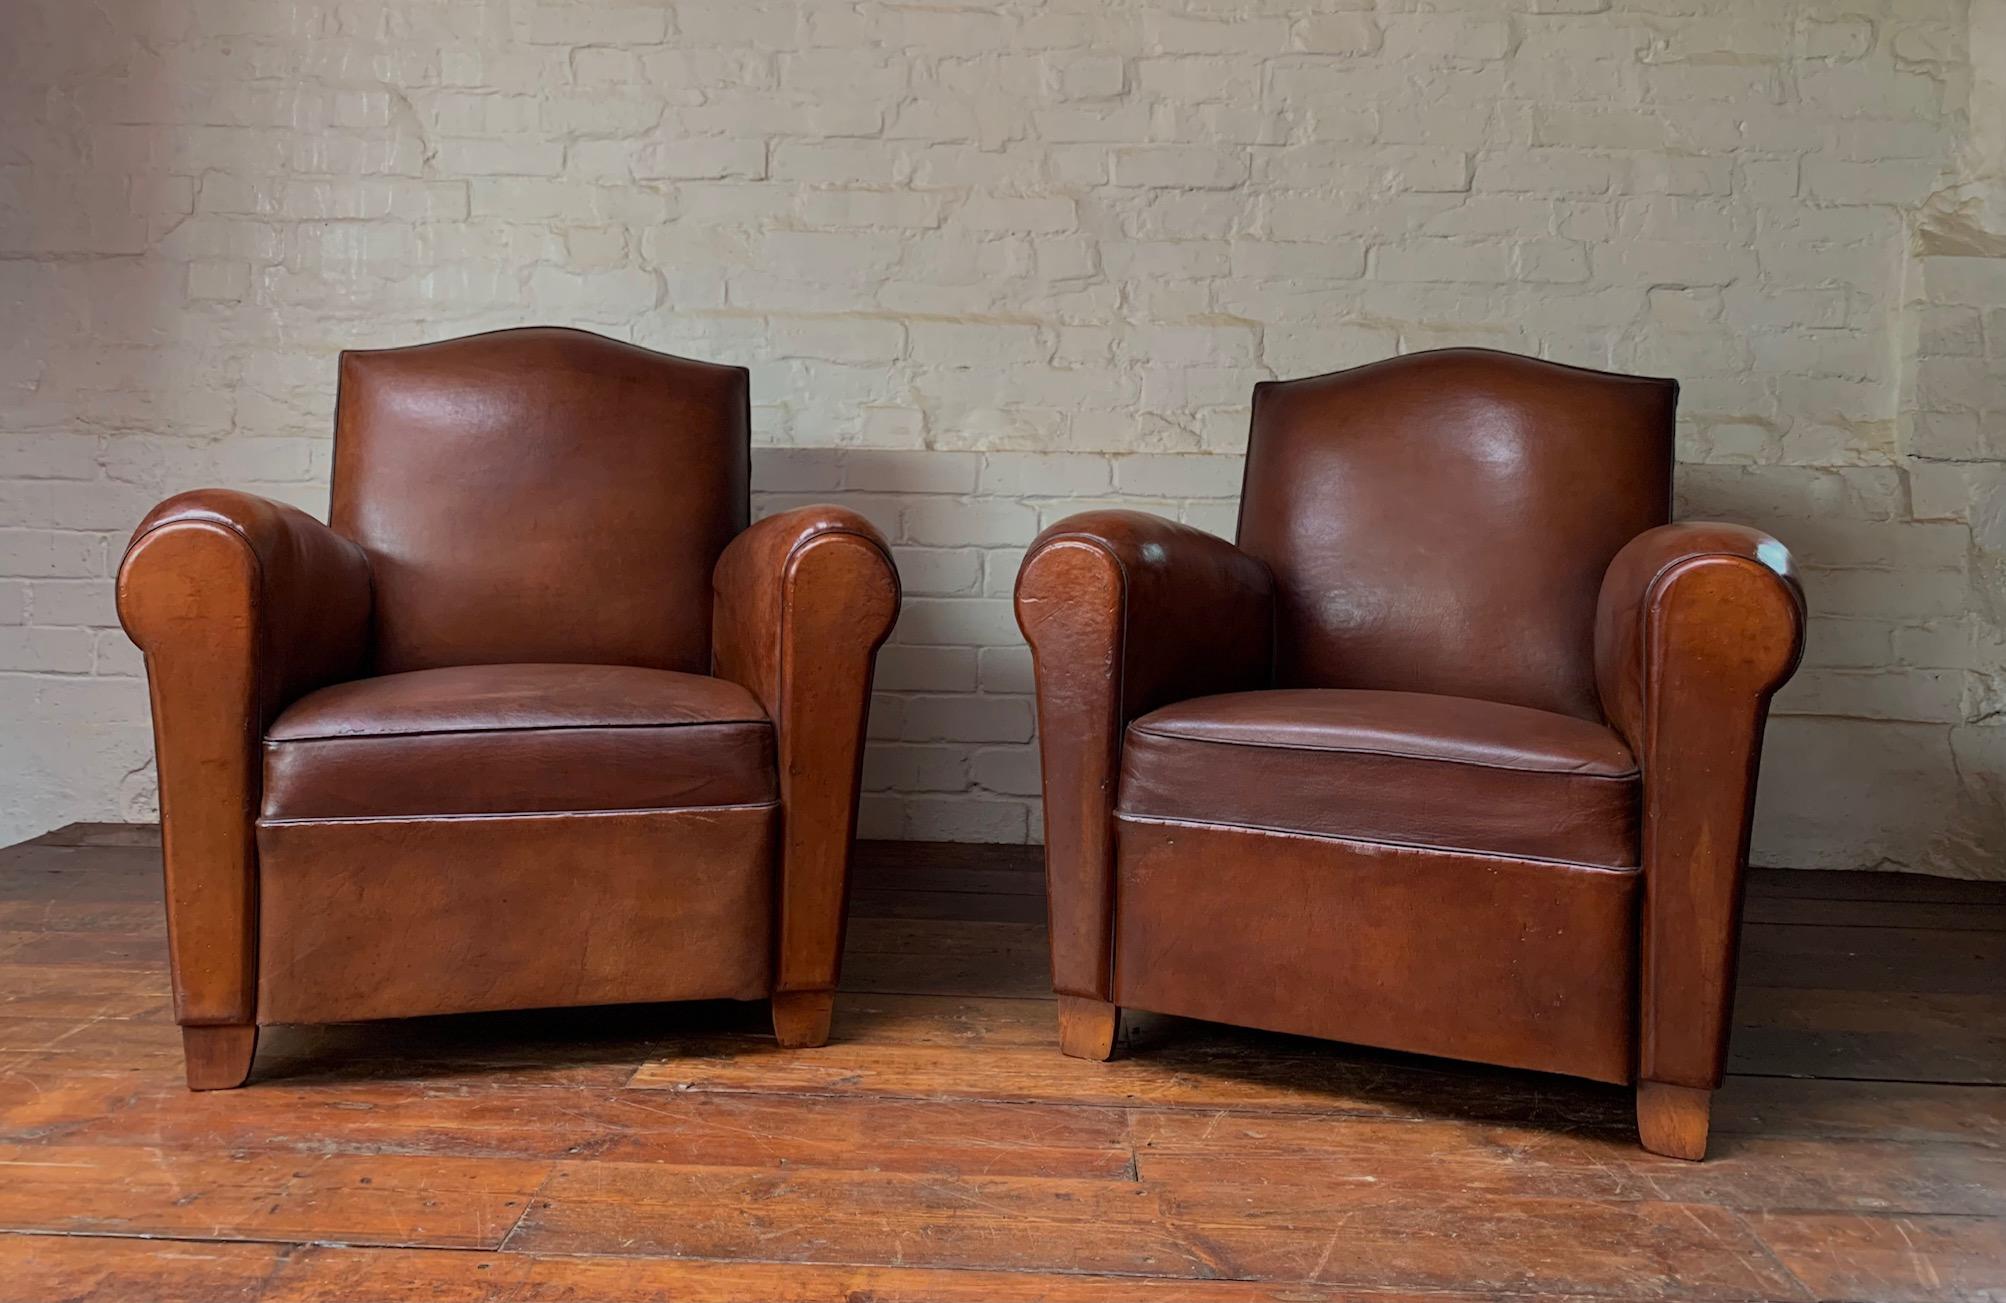 A Wonderful Pair of French Leather Club Chairs Chapeau du Gendarme Models, C1950 For Sale 2